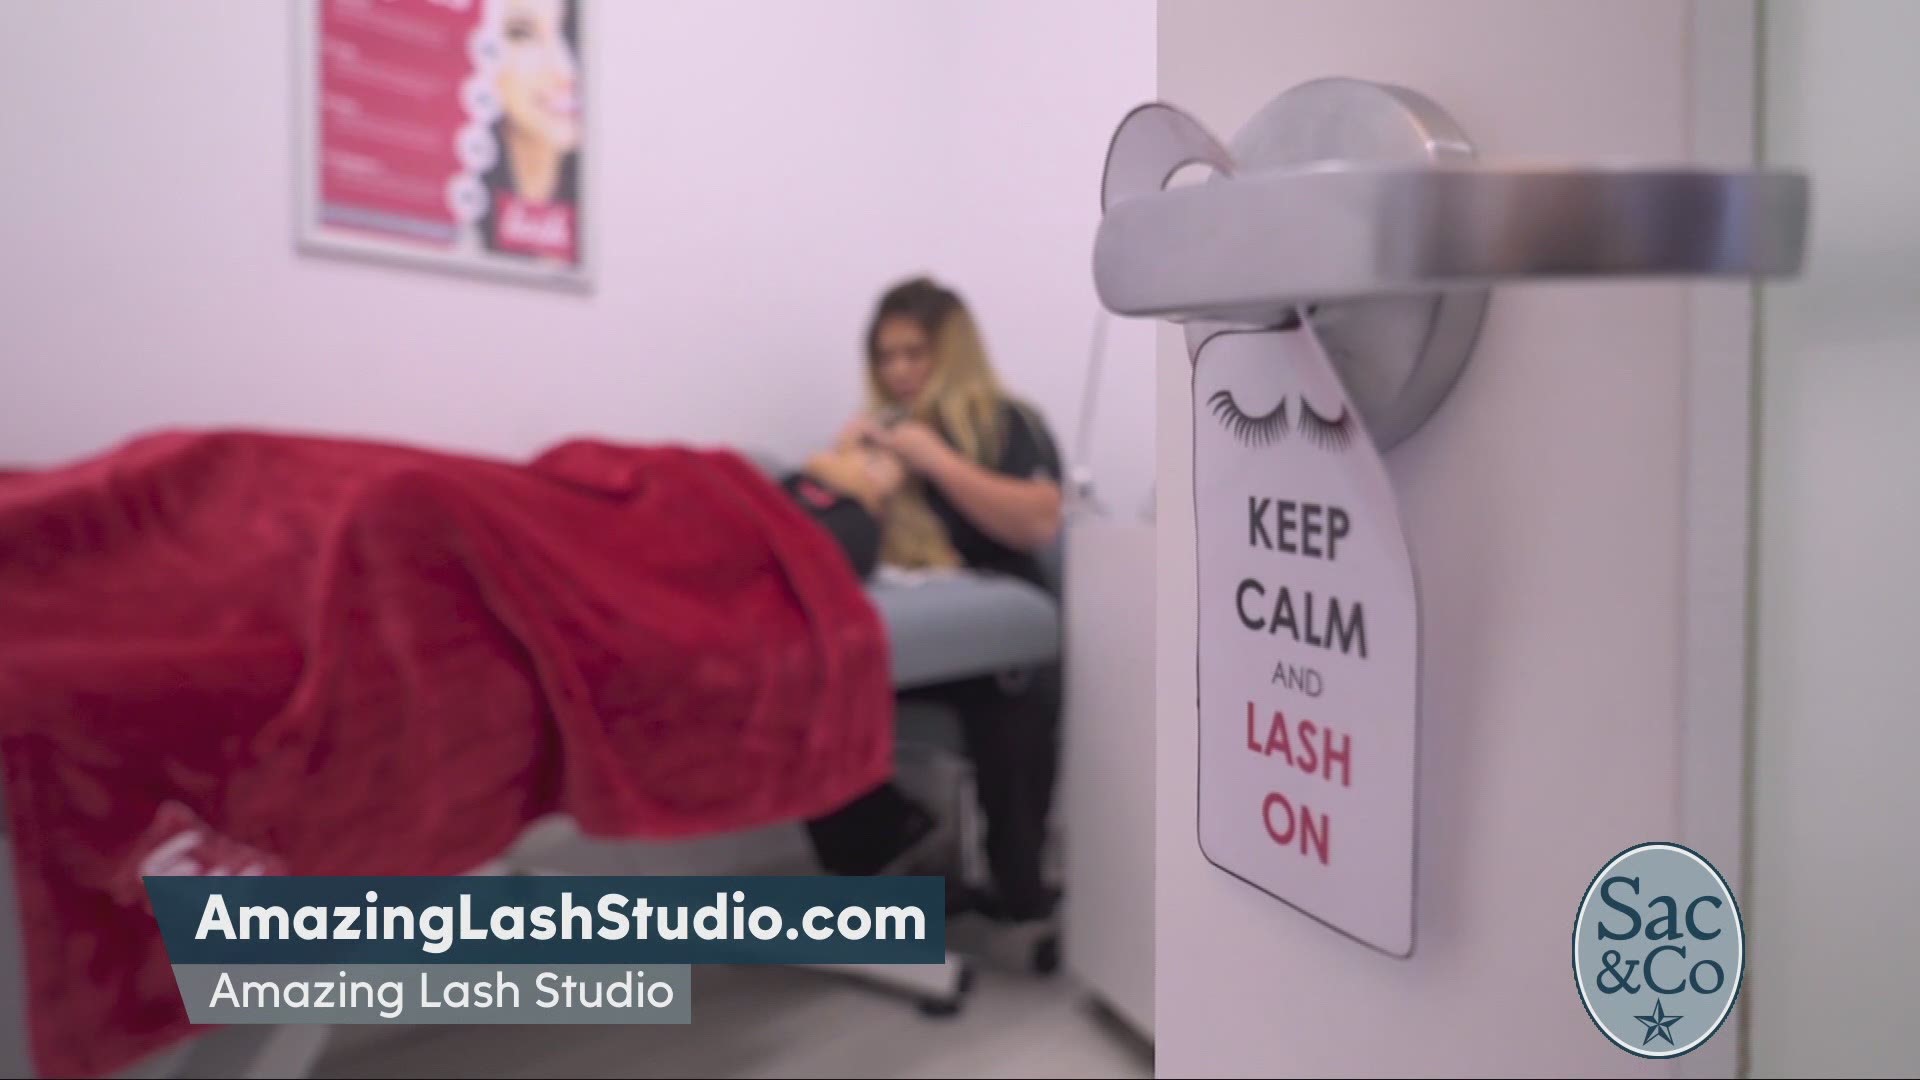 Amazing Lash can give you the stunning look you want while you sit back and relax! The following is a paid segment sponsored by Amazing Lash.